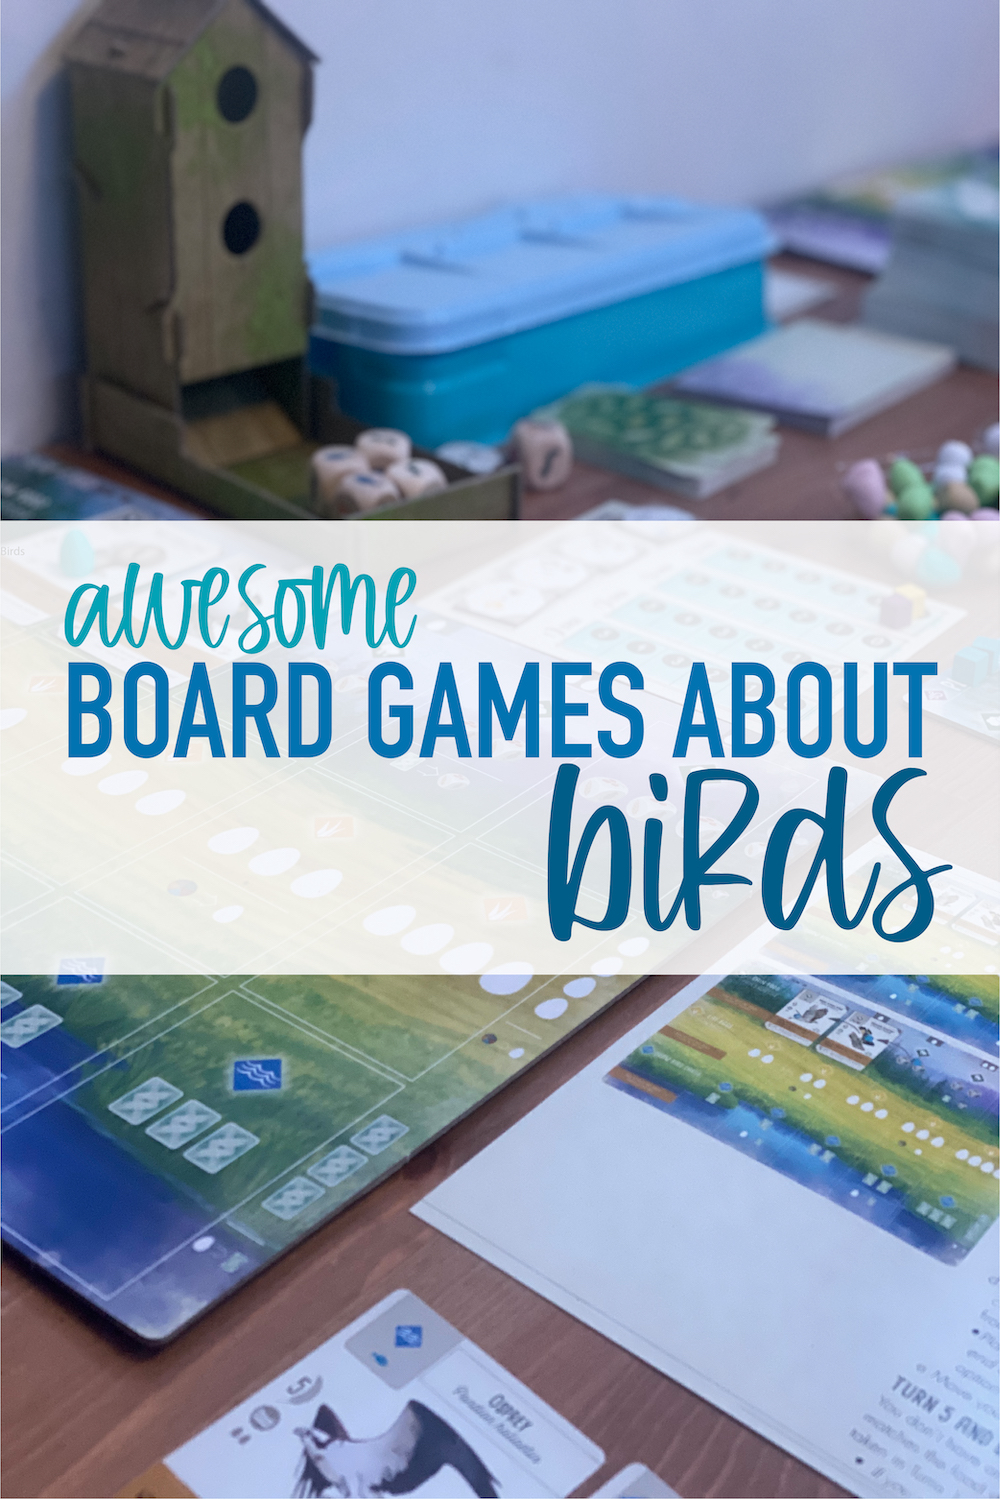 awesome board games about birds